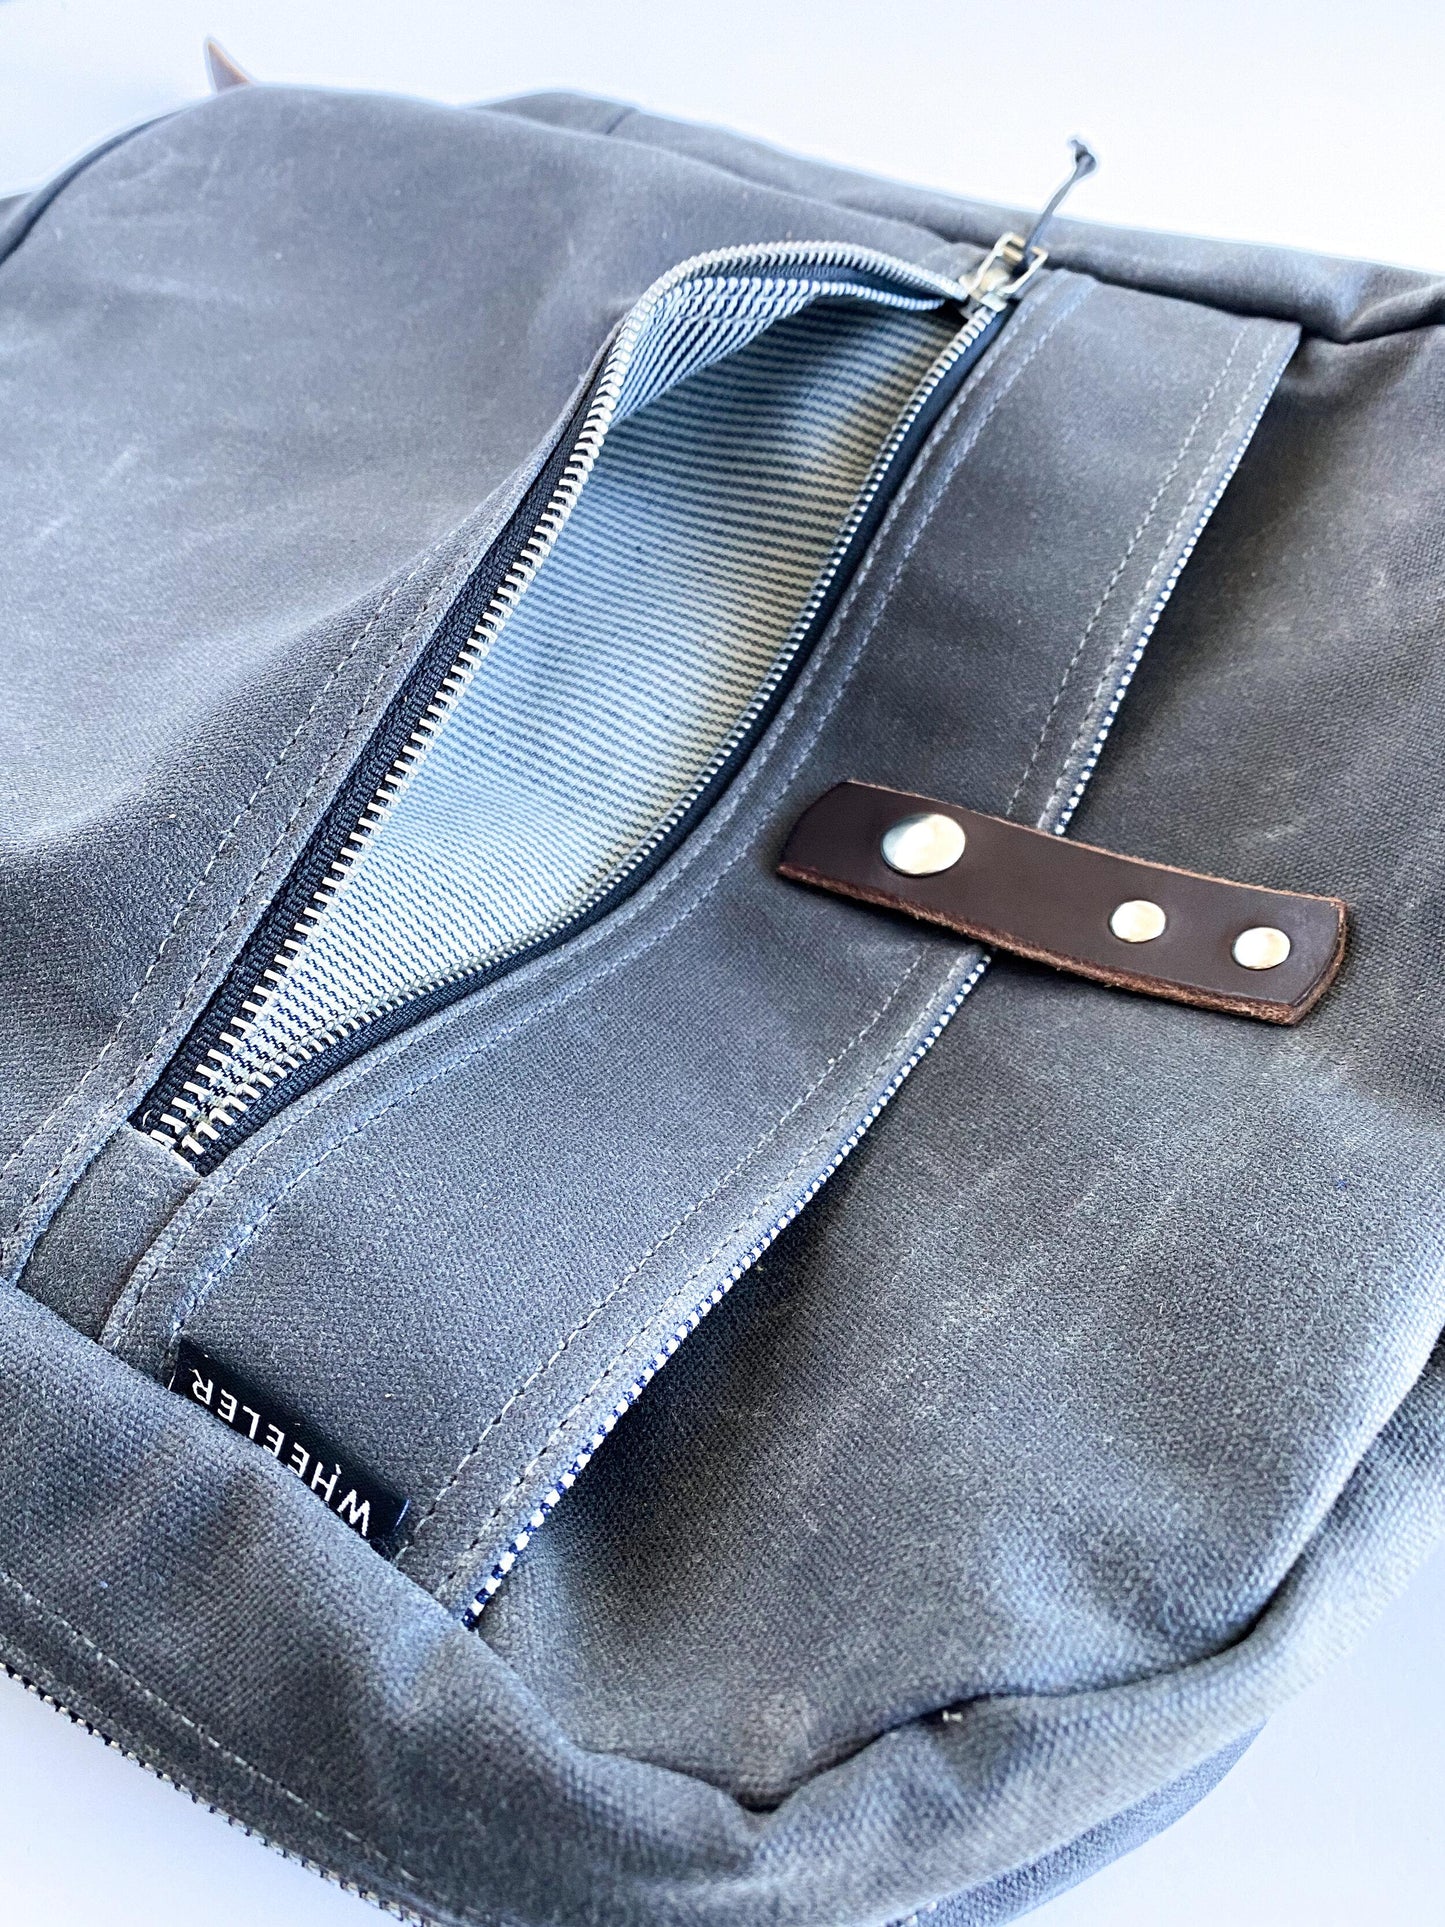 Waxed cotton canvas backpack zipper pocket & snap detail. 